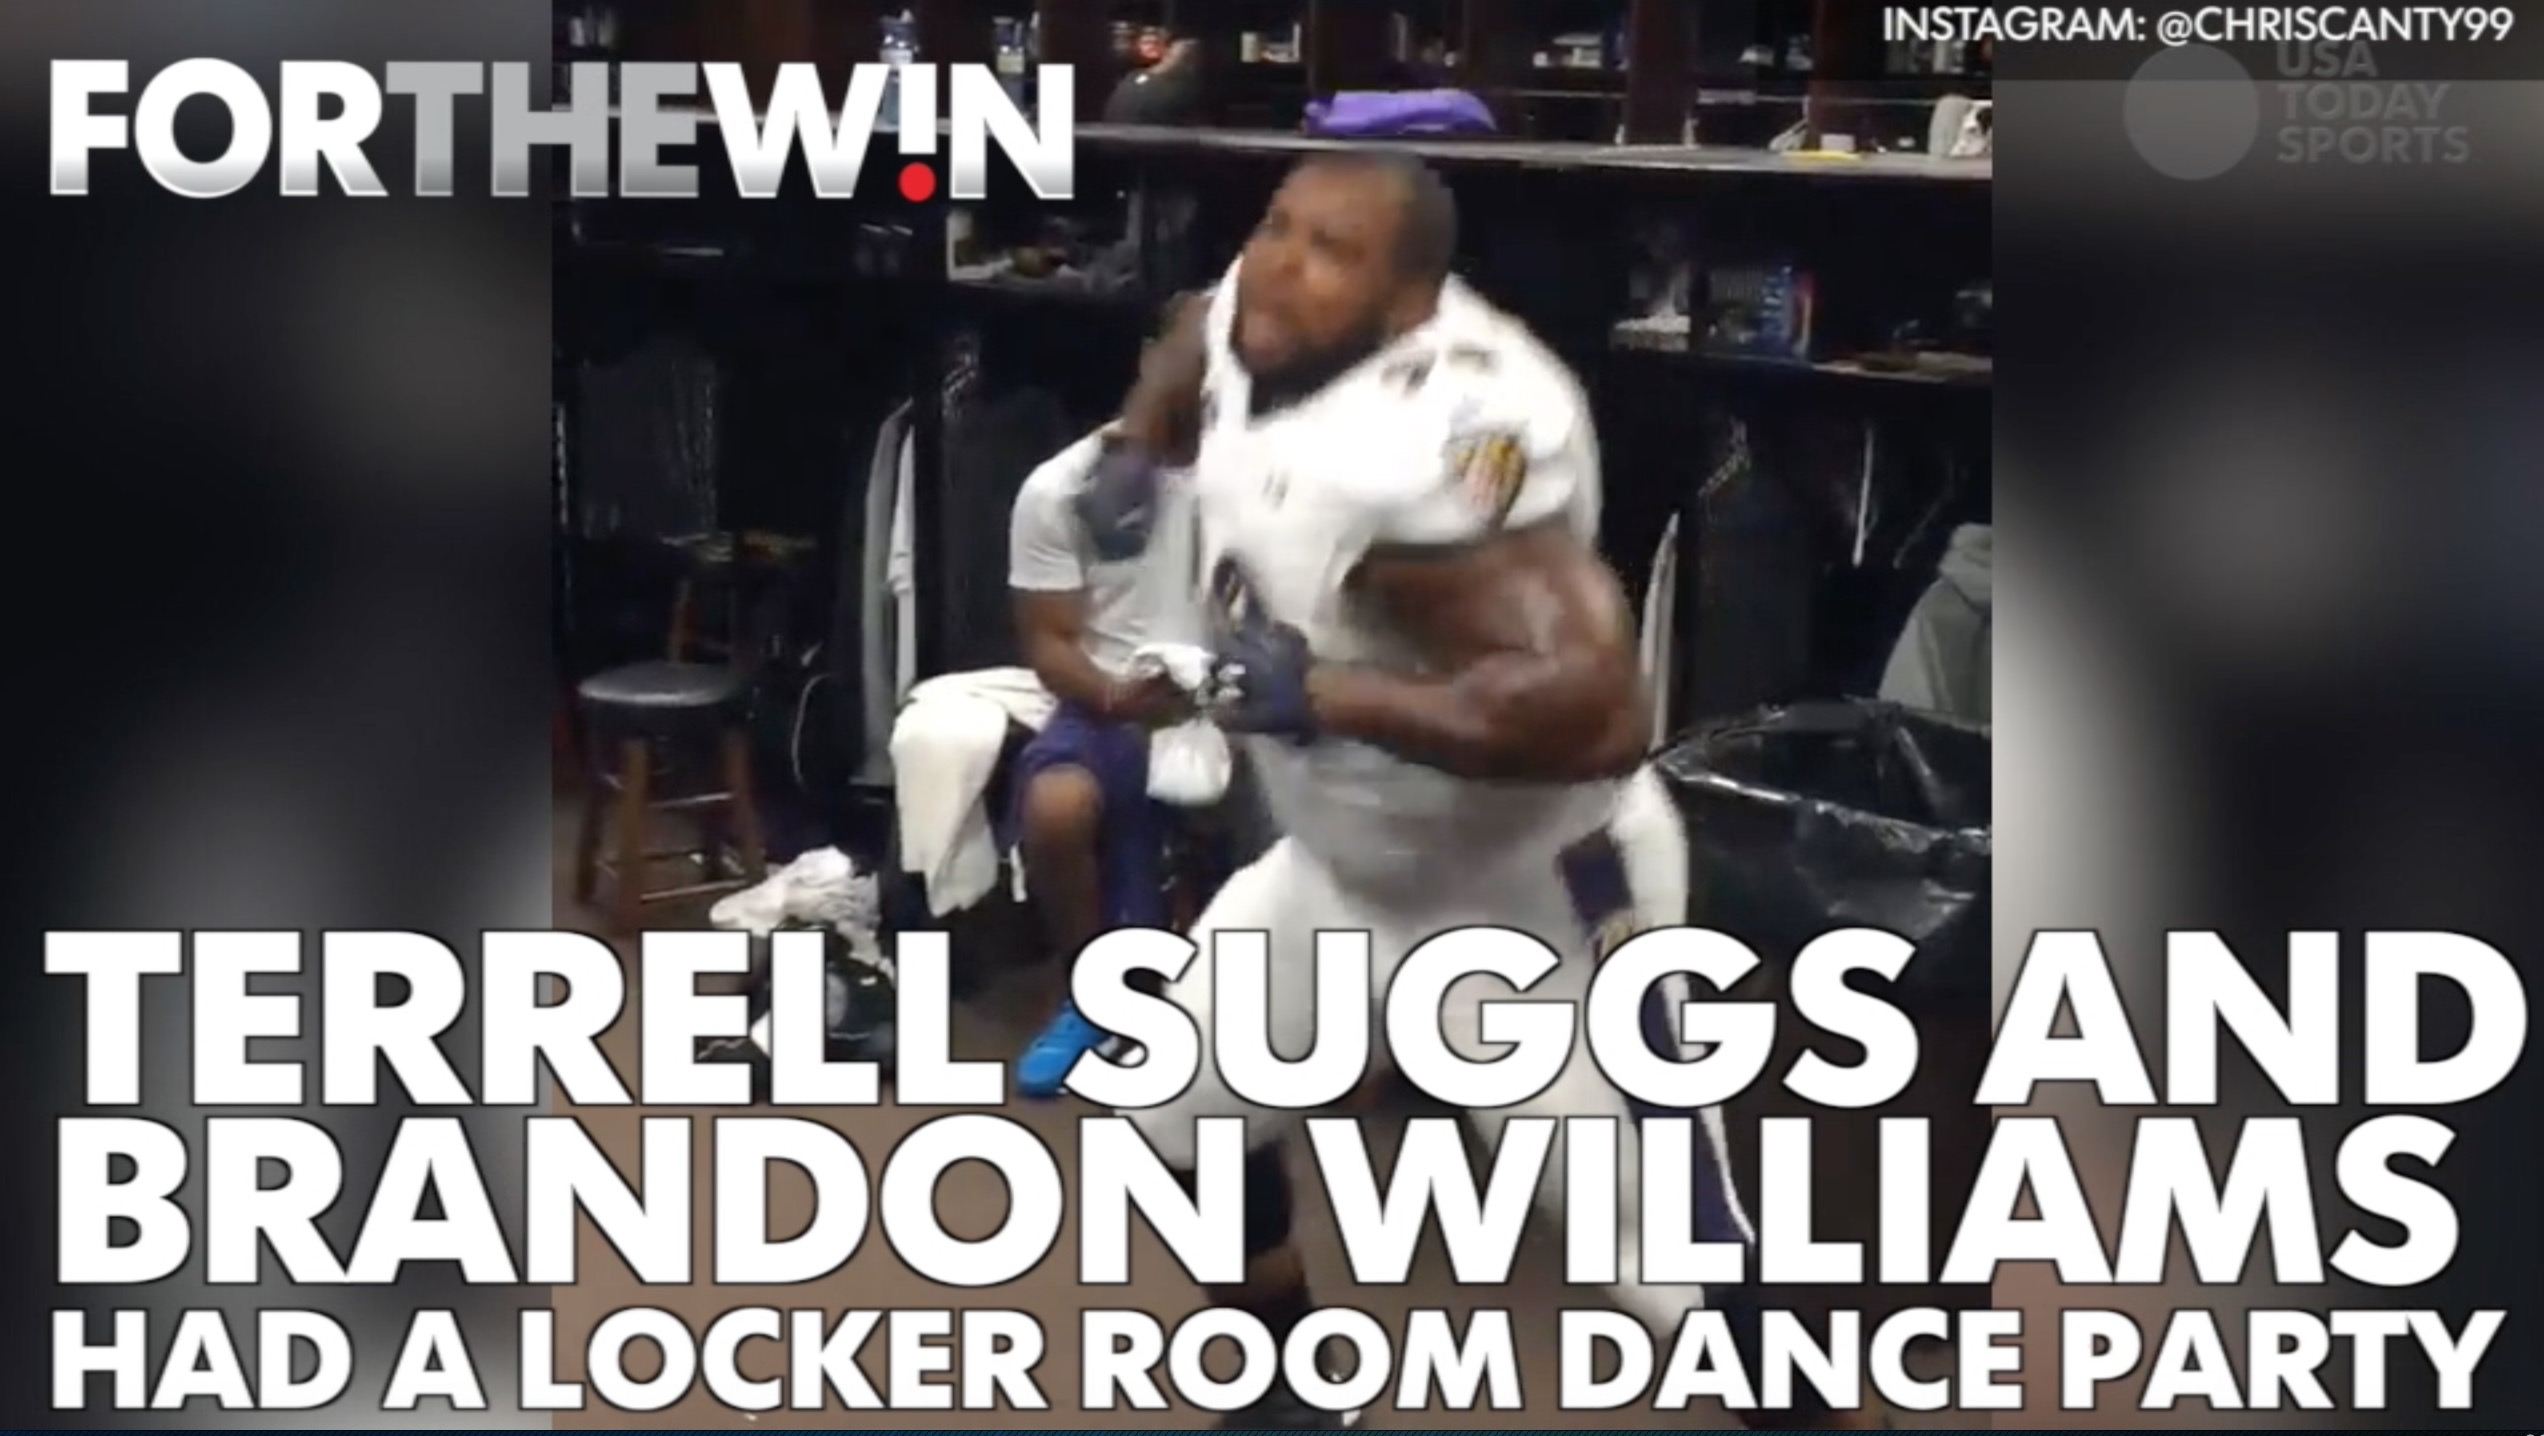 The Baltimore Ravens had a locker room dance party